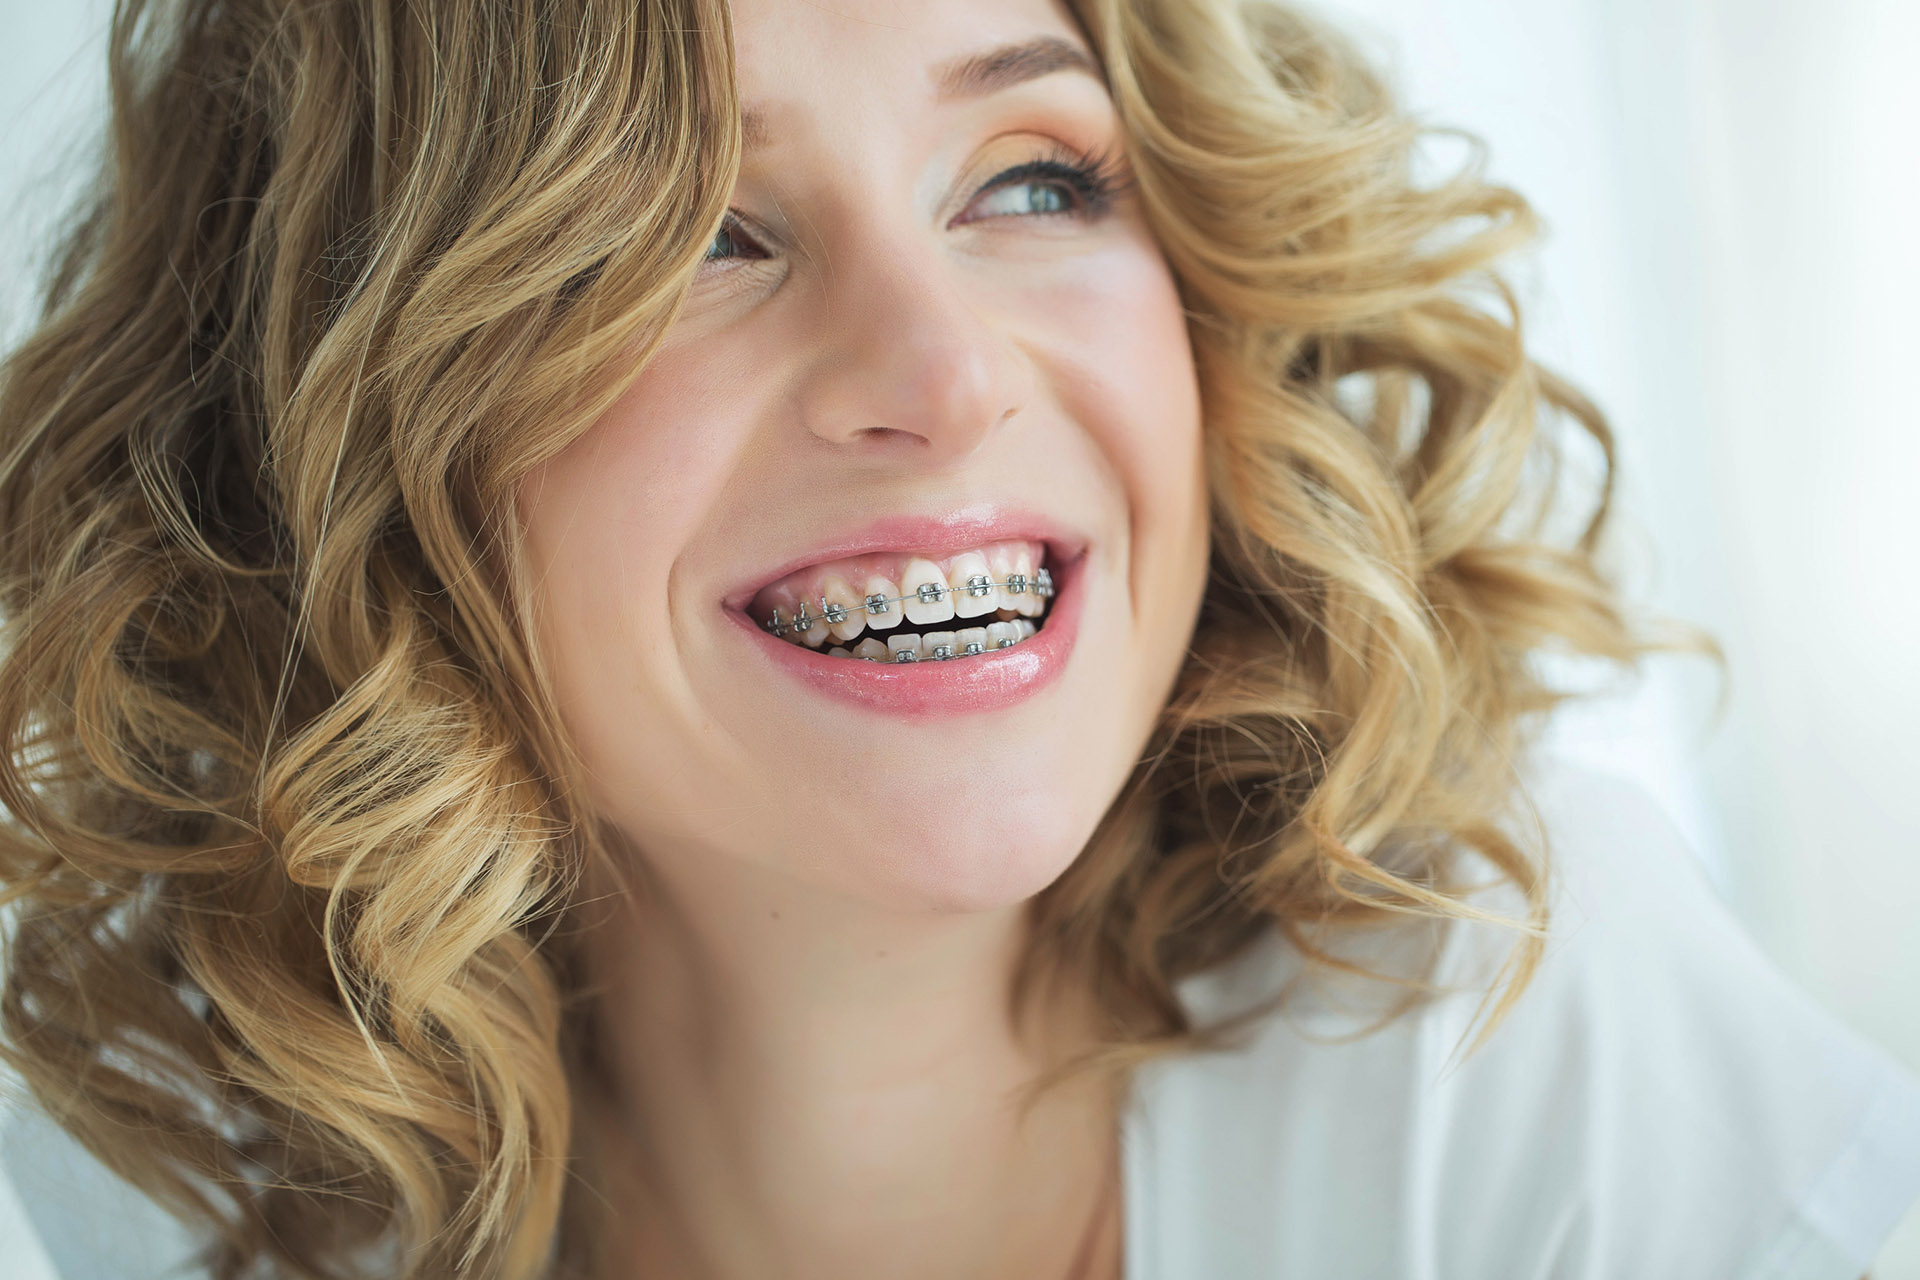 adult braces 2 - Braces for Adults: It's Never Too Late to Get the Smile You Want